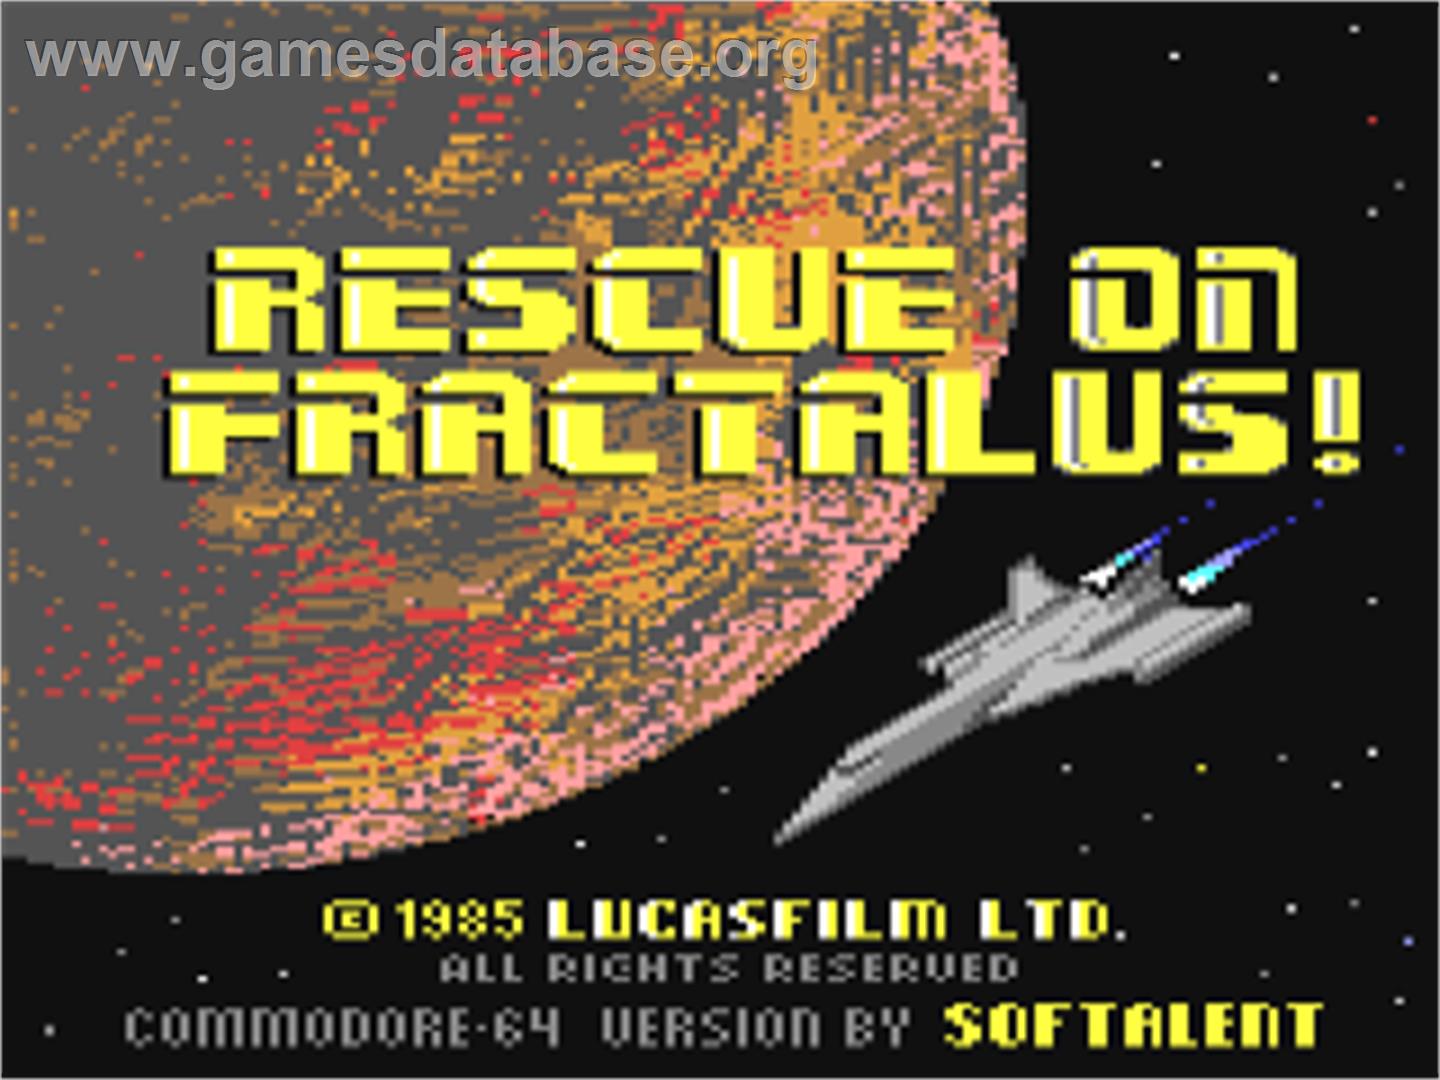 Rescue on Fractalus! - Commodore 64 - Artwork - Title Screen